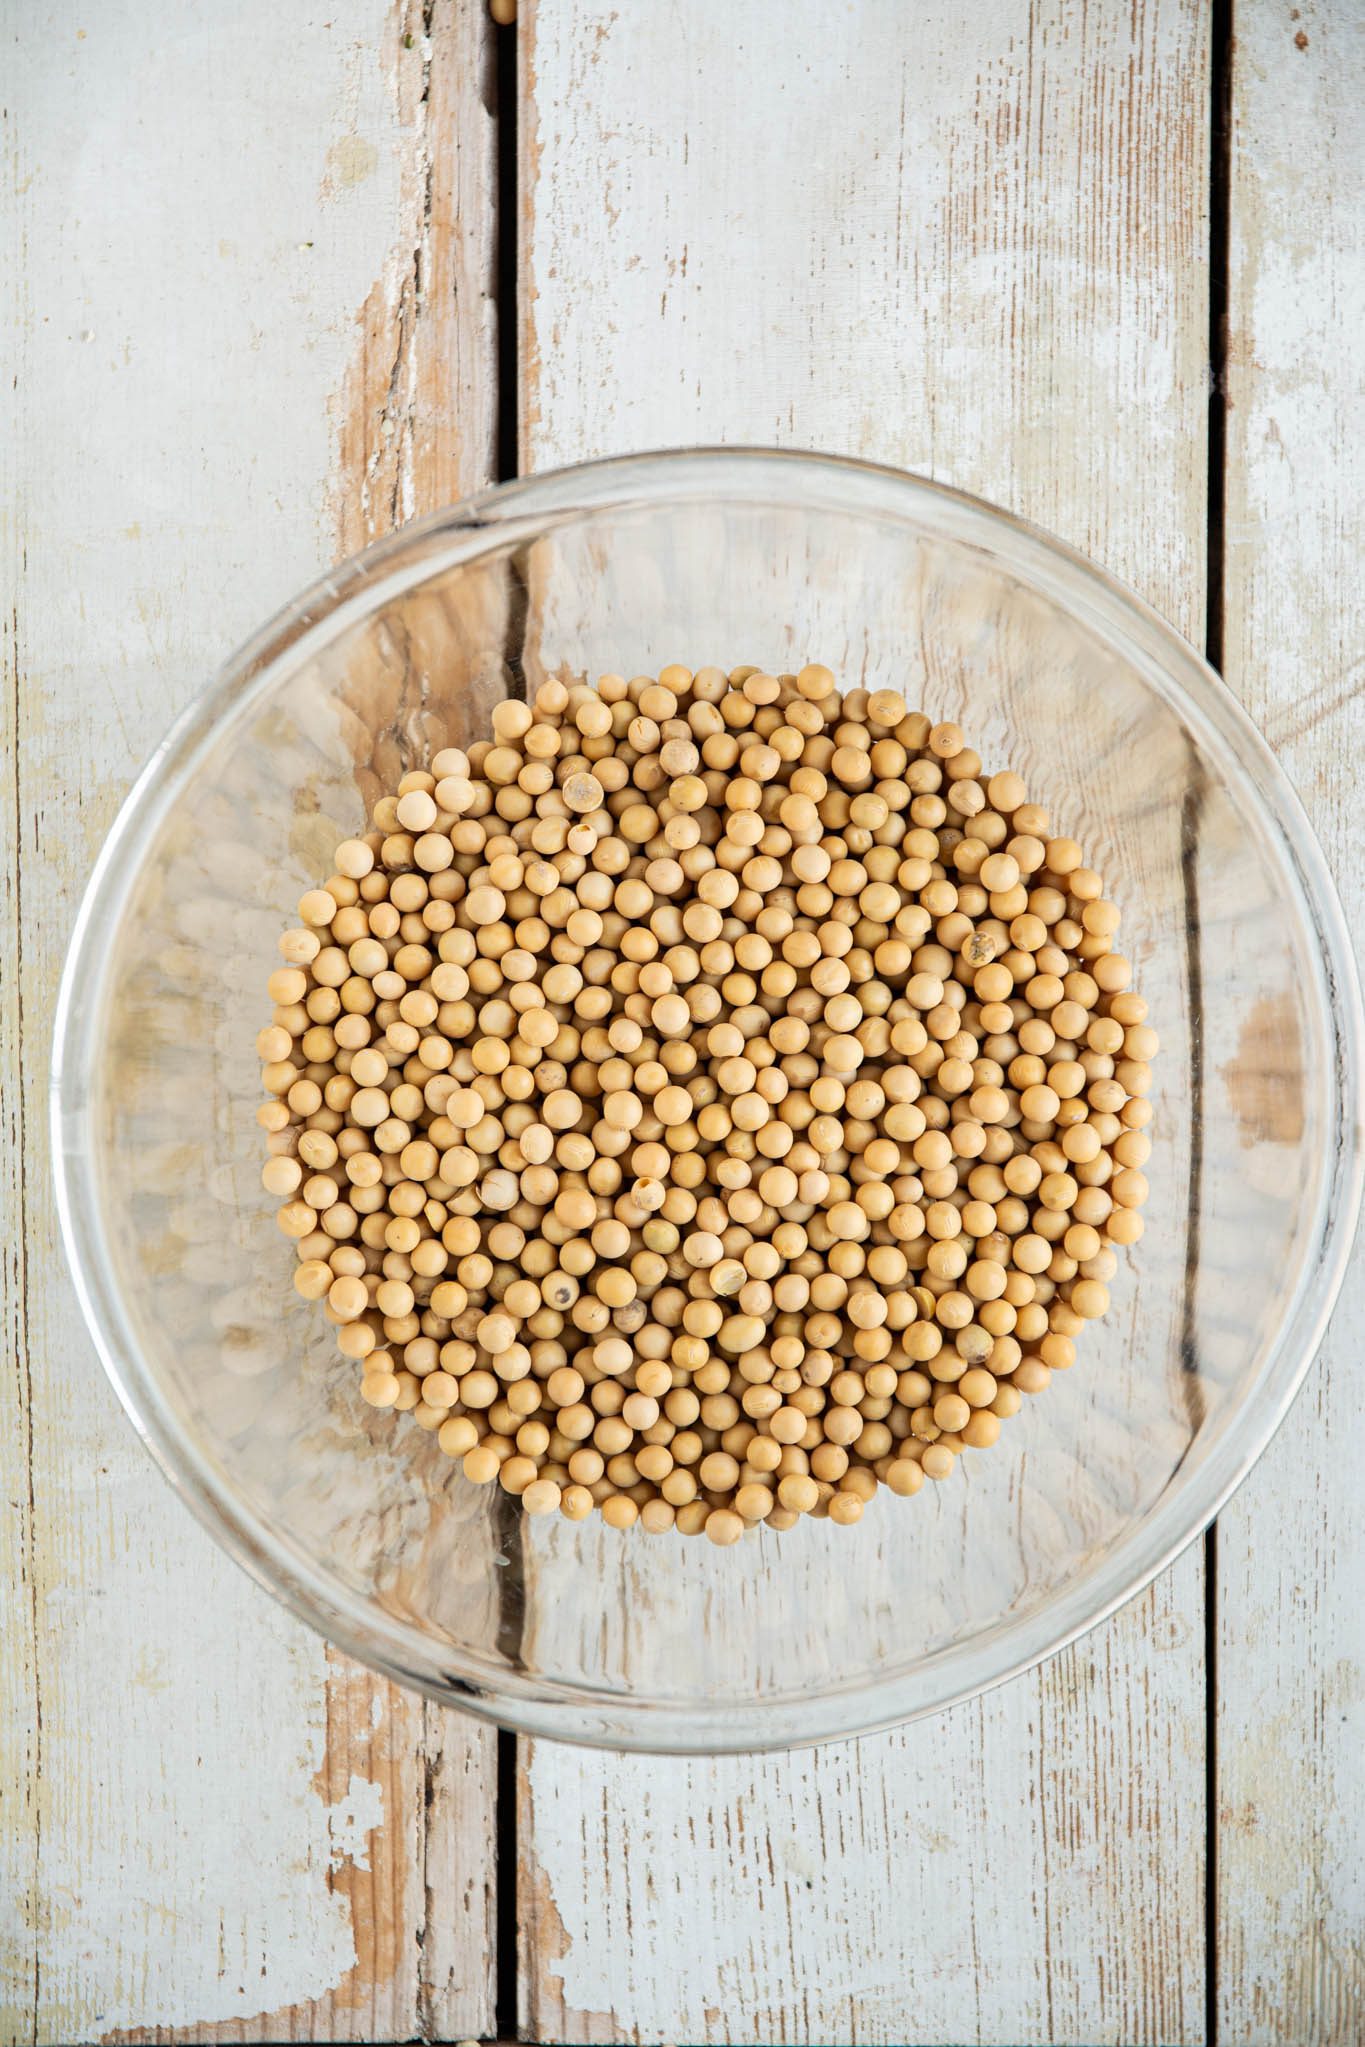 Learn how to cook soybeans at home in a regular pot or a saucepan. Use the cooked soybeans for high protein hummus, in soups, stews, and salads, or nibble on them as they are.